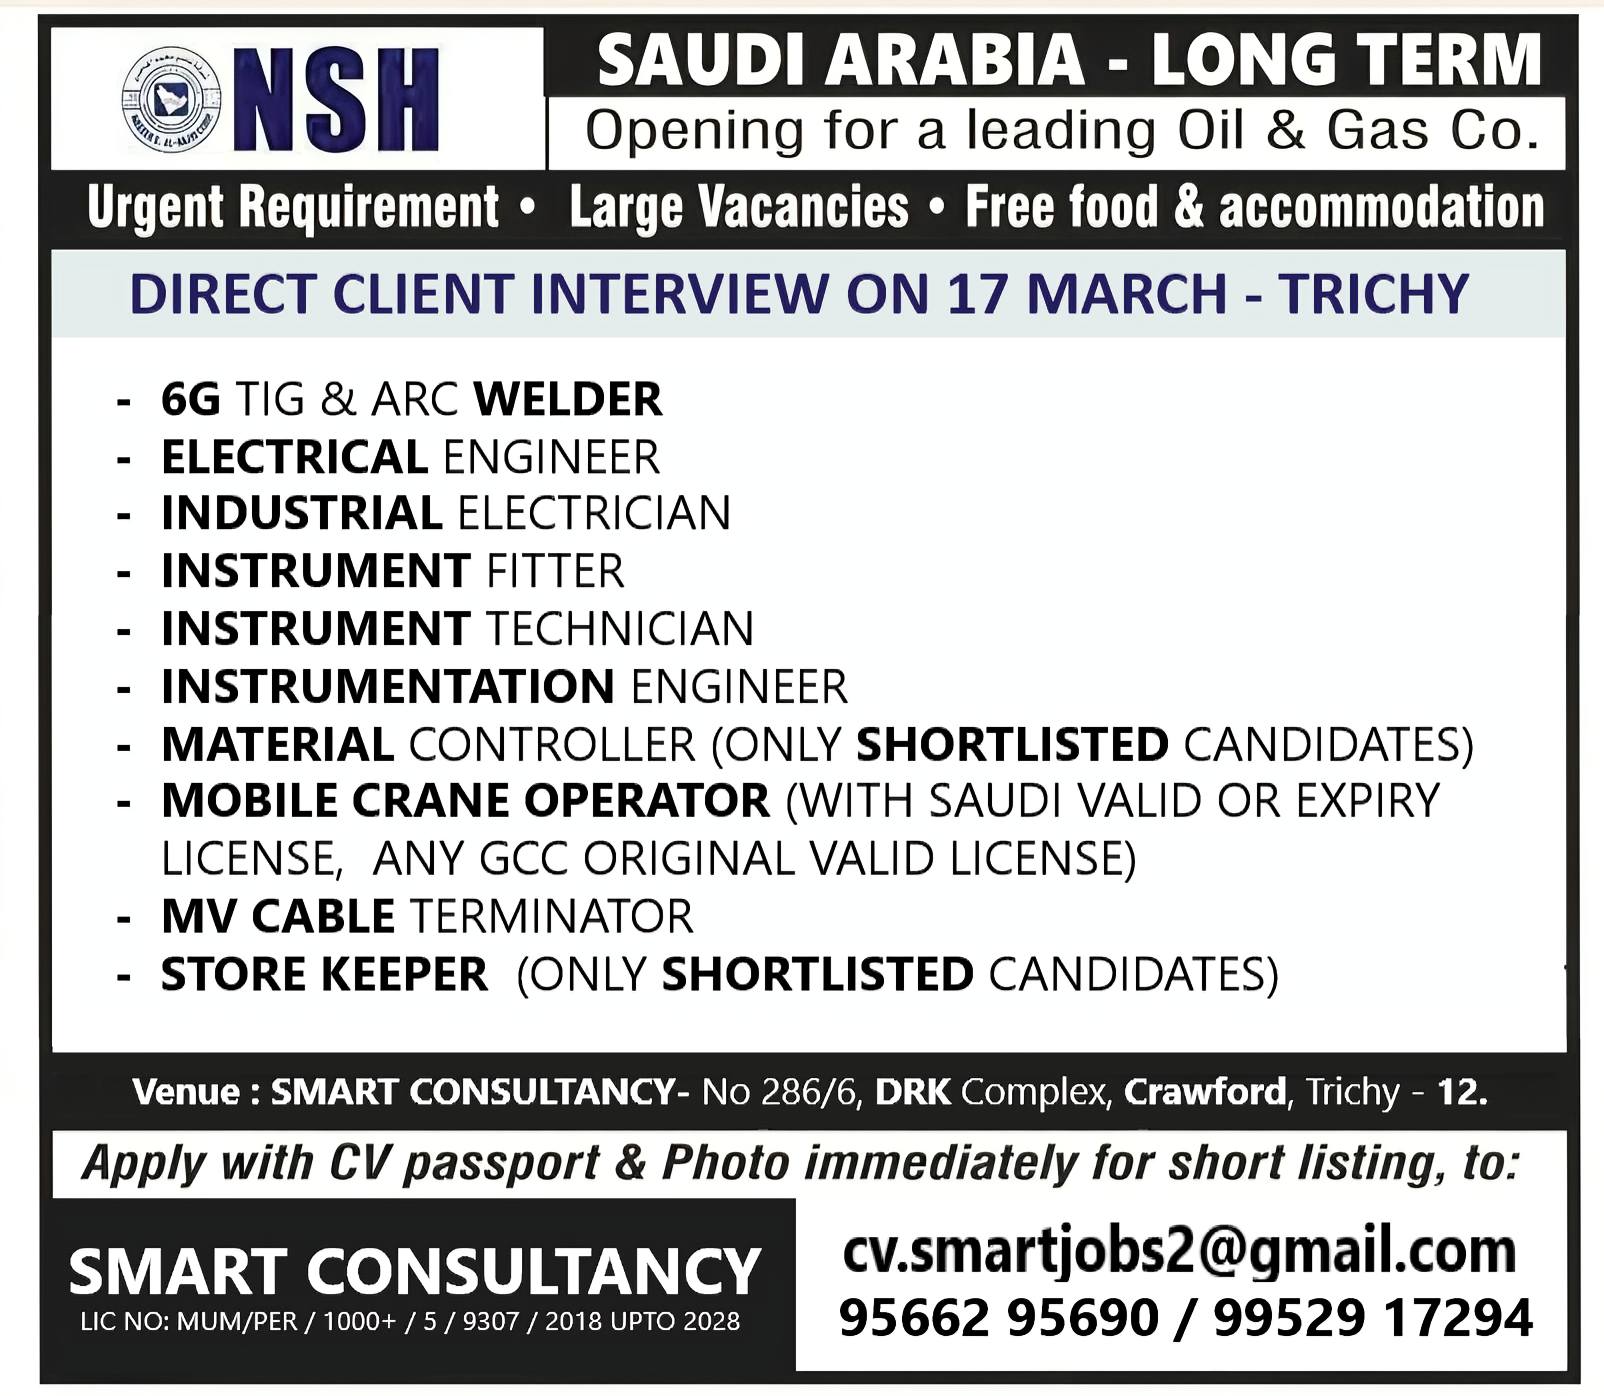 WANTED FOR A LEADING OIL & GAS COMPANY – SAUDI / DIRECT CLIENT INTERVIEW ON 17 MARCH – TRICHY